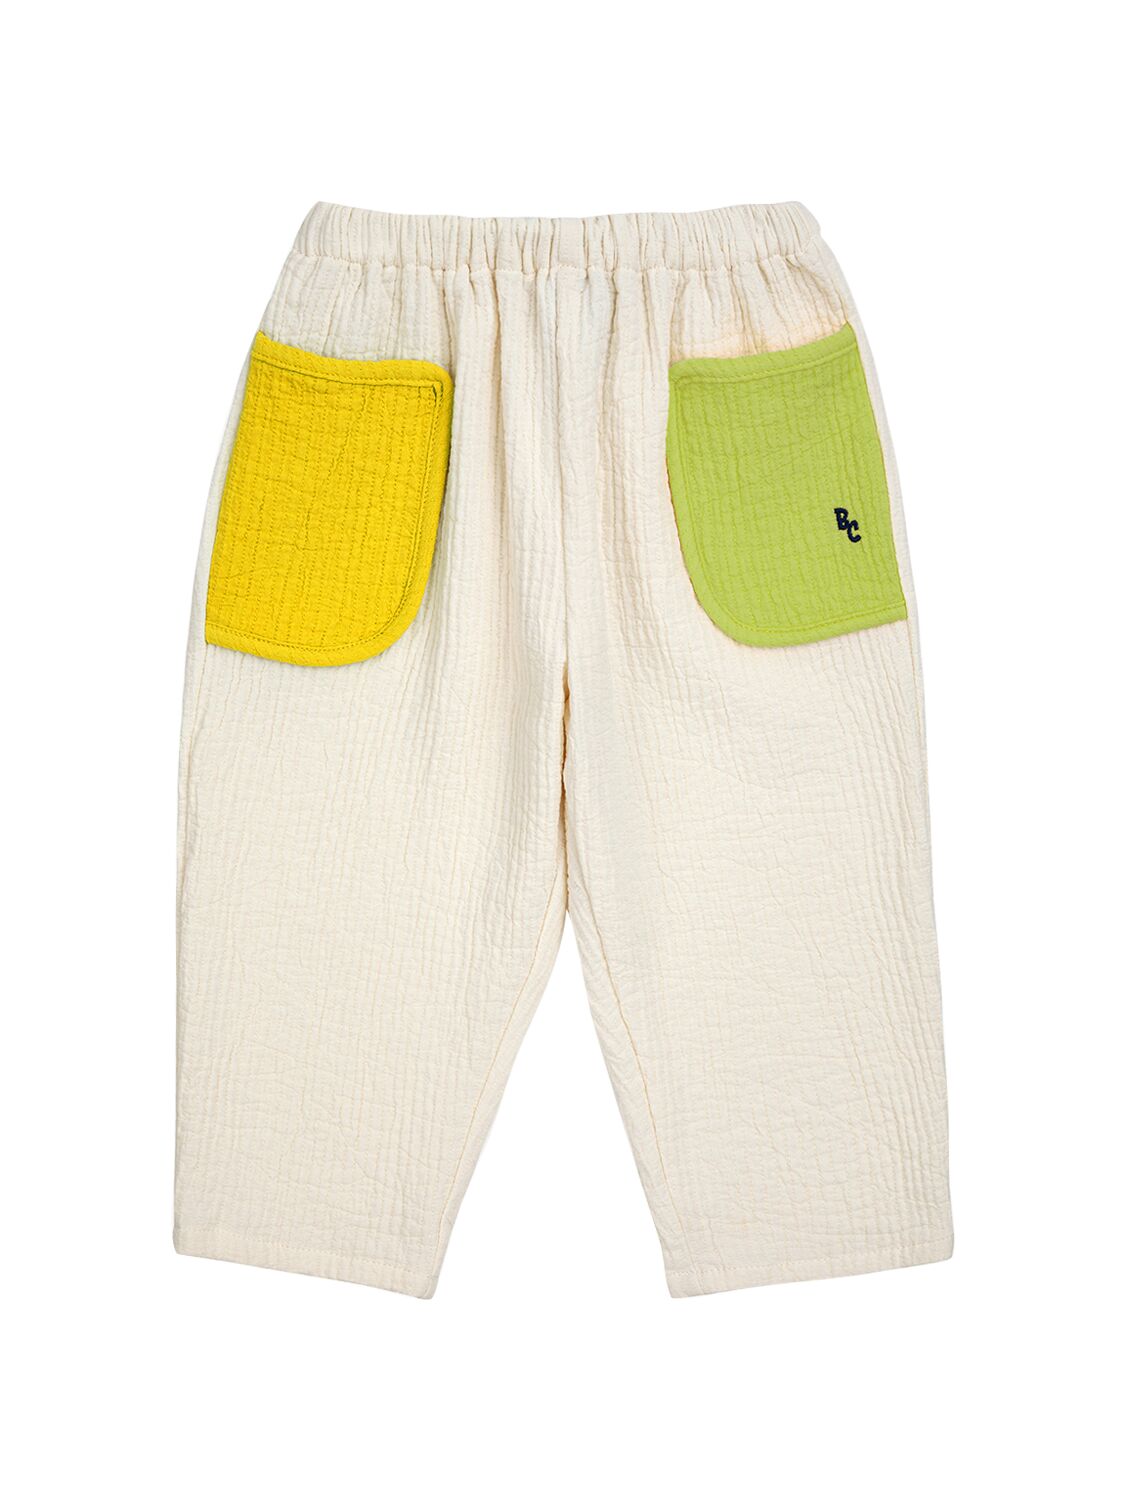 Bobo Choses Babies' 褶皱绗缝棉质裤子 In Off-white